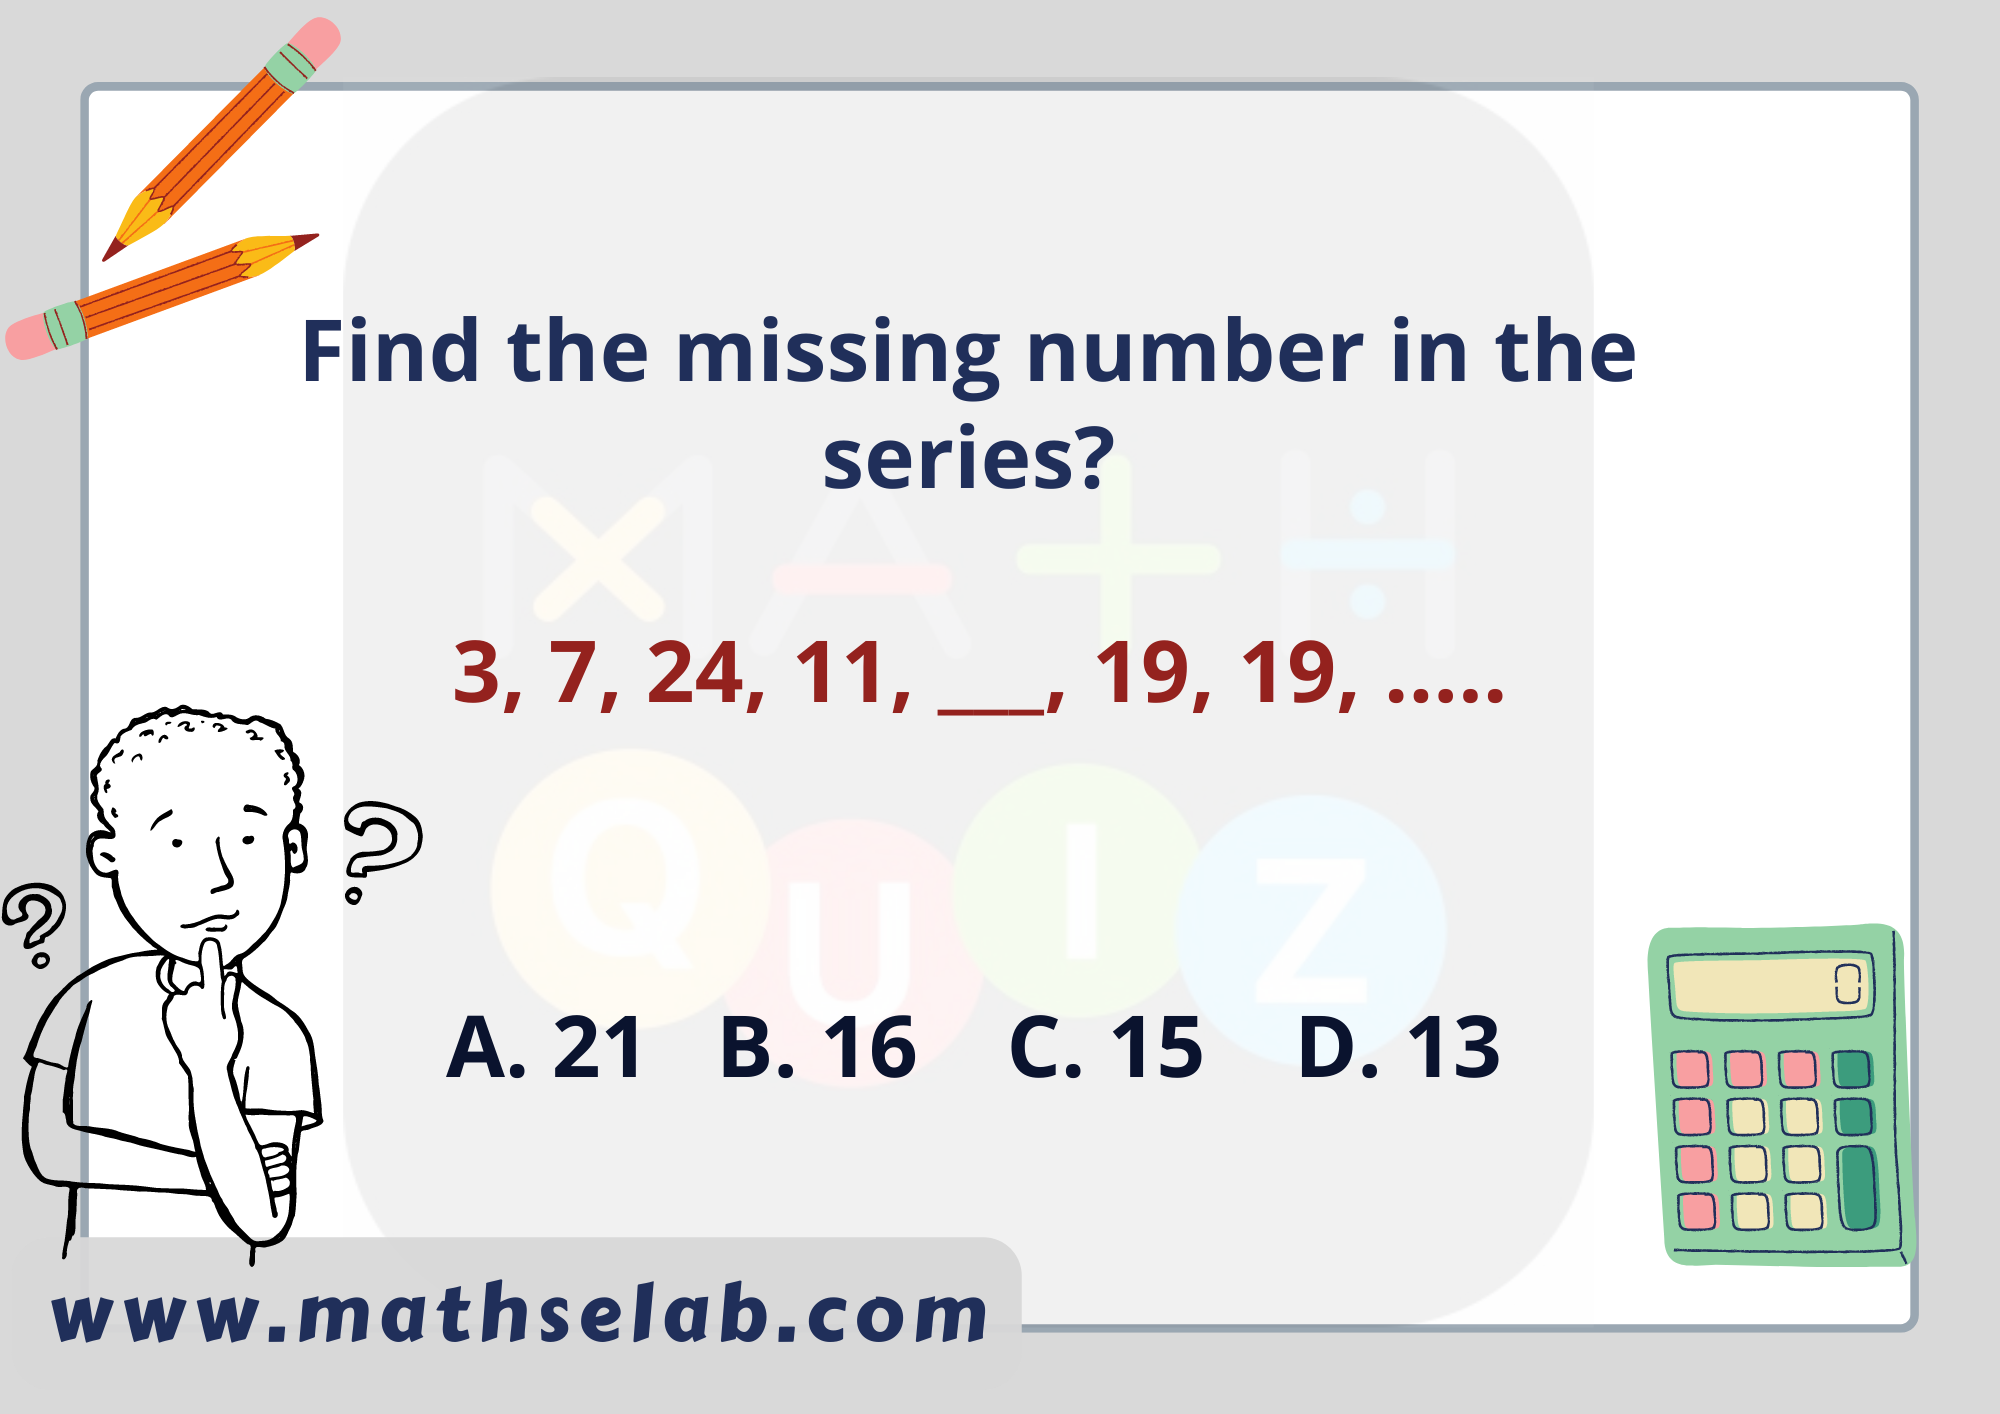 Find the missing number in the series 3, 7, 24, 11, ___, 19, 19, ..... - www.mathselab.com